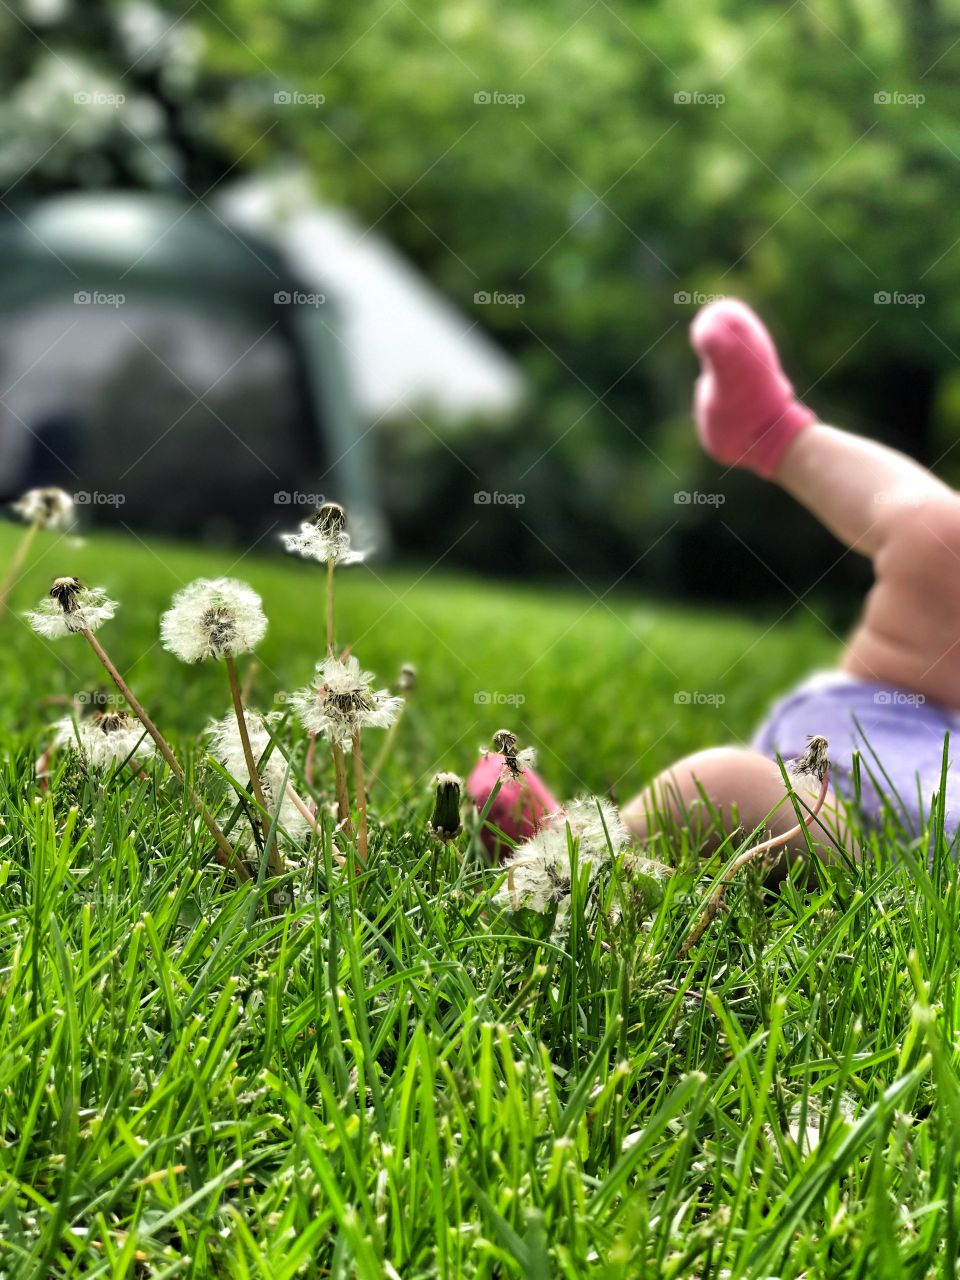 Baby in grass